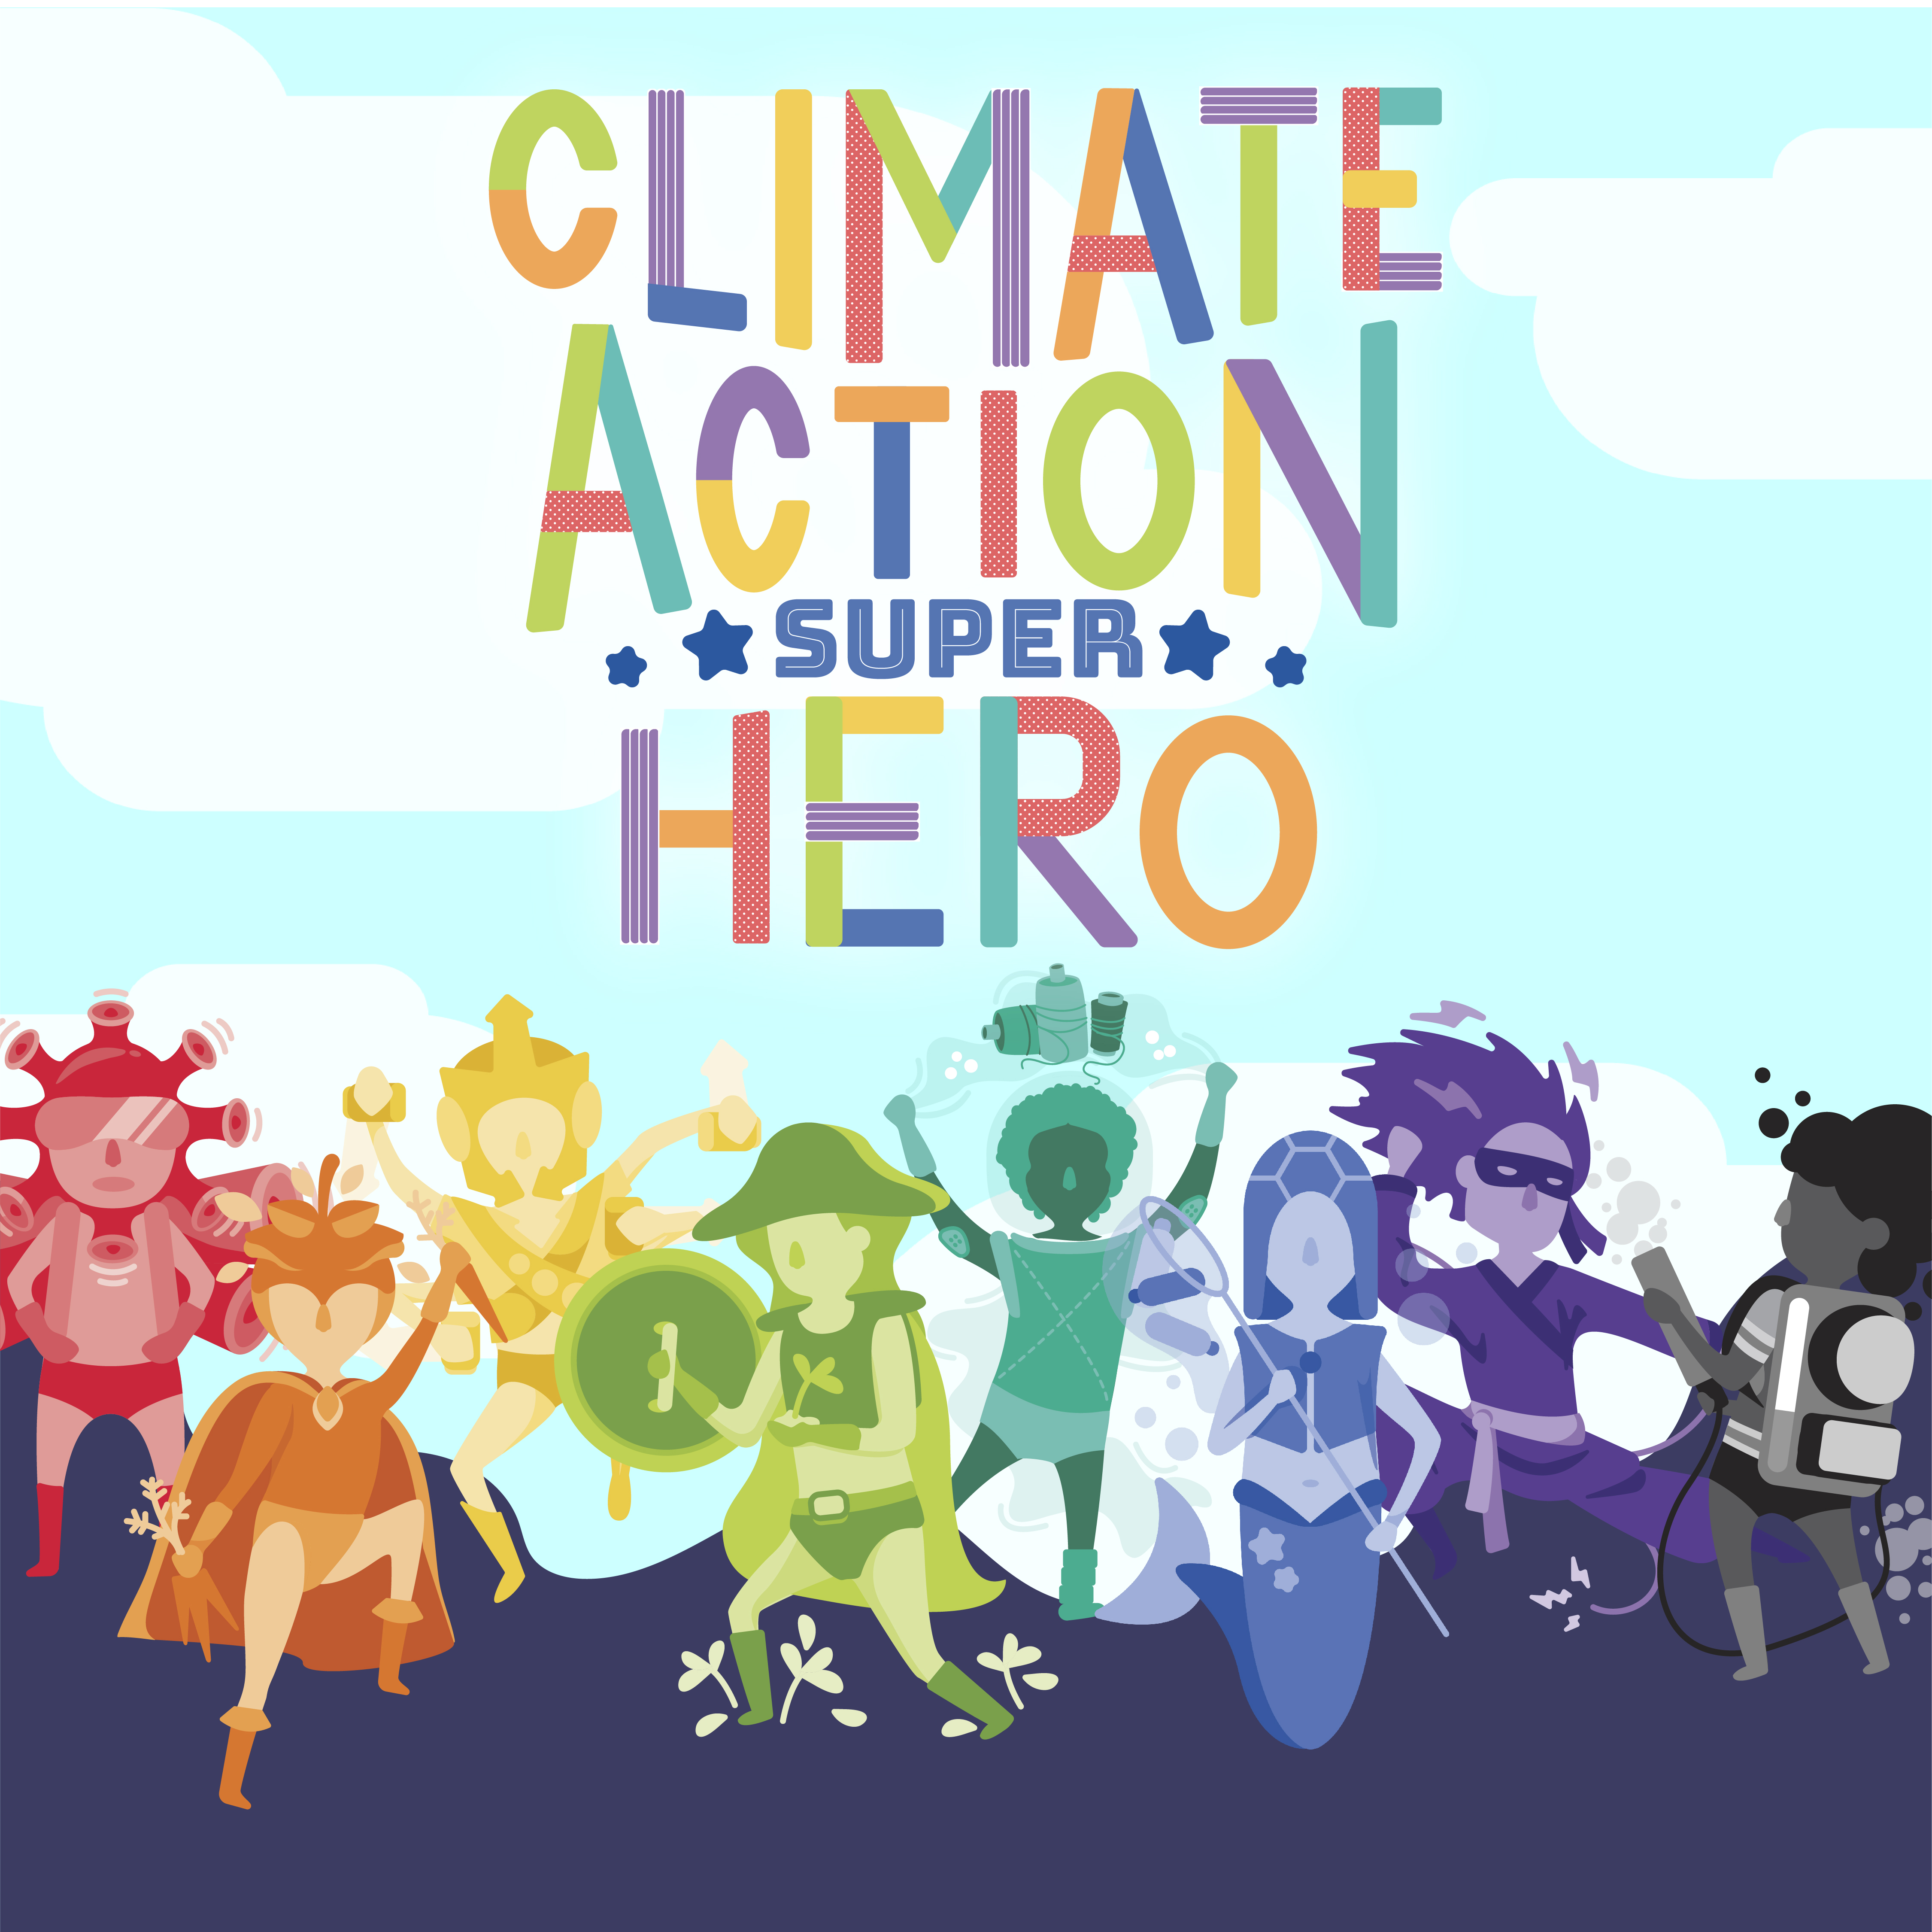 Animated "Climate Action Super Hero" characters